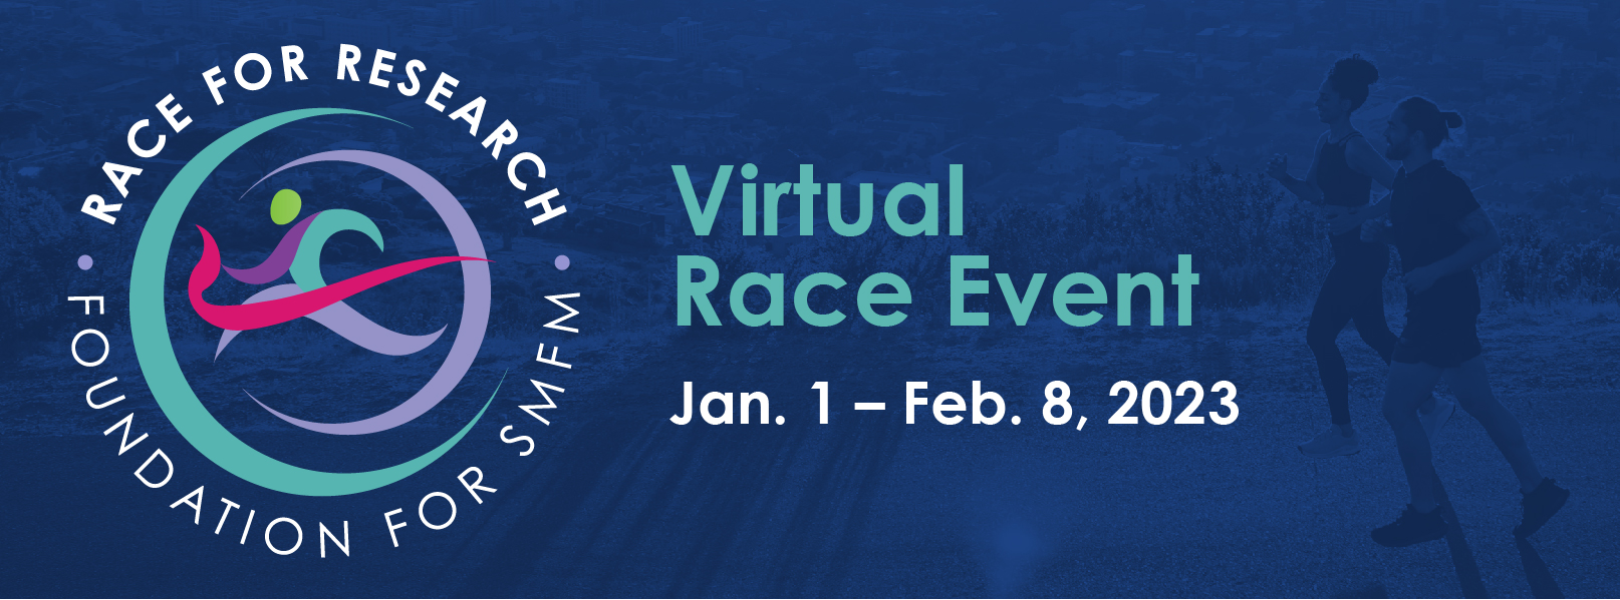 The Foundation for SMFM's Virtual Race for Research